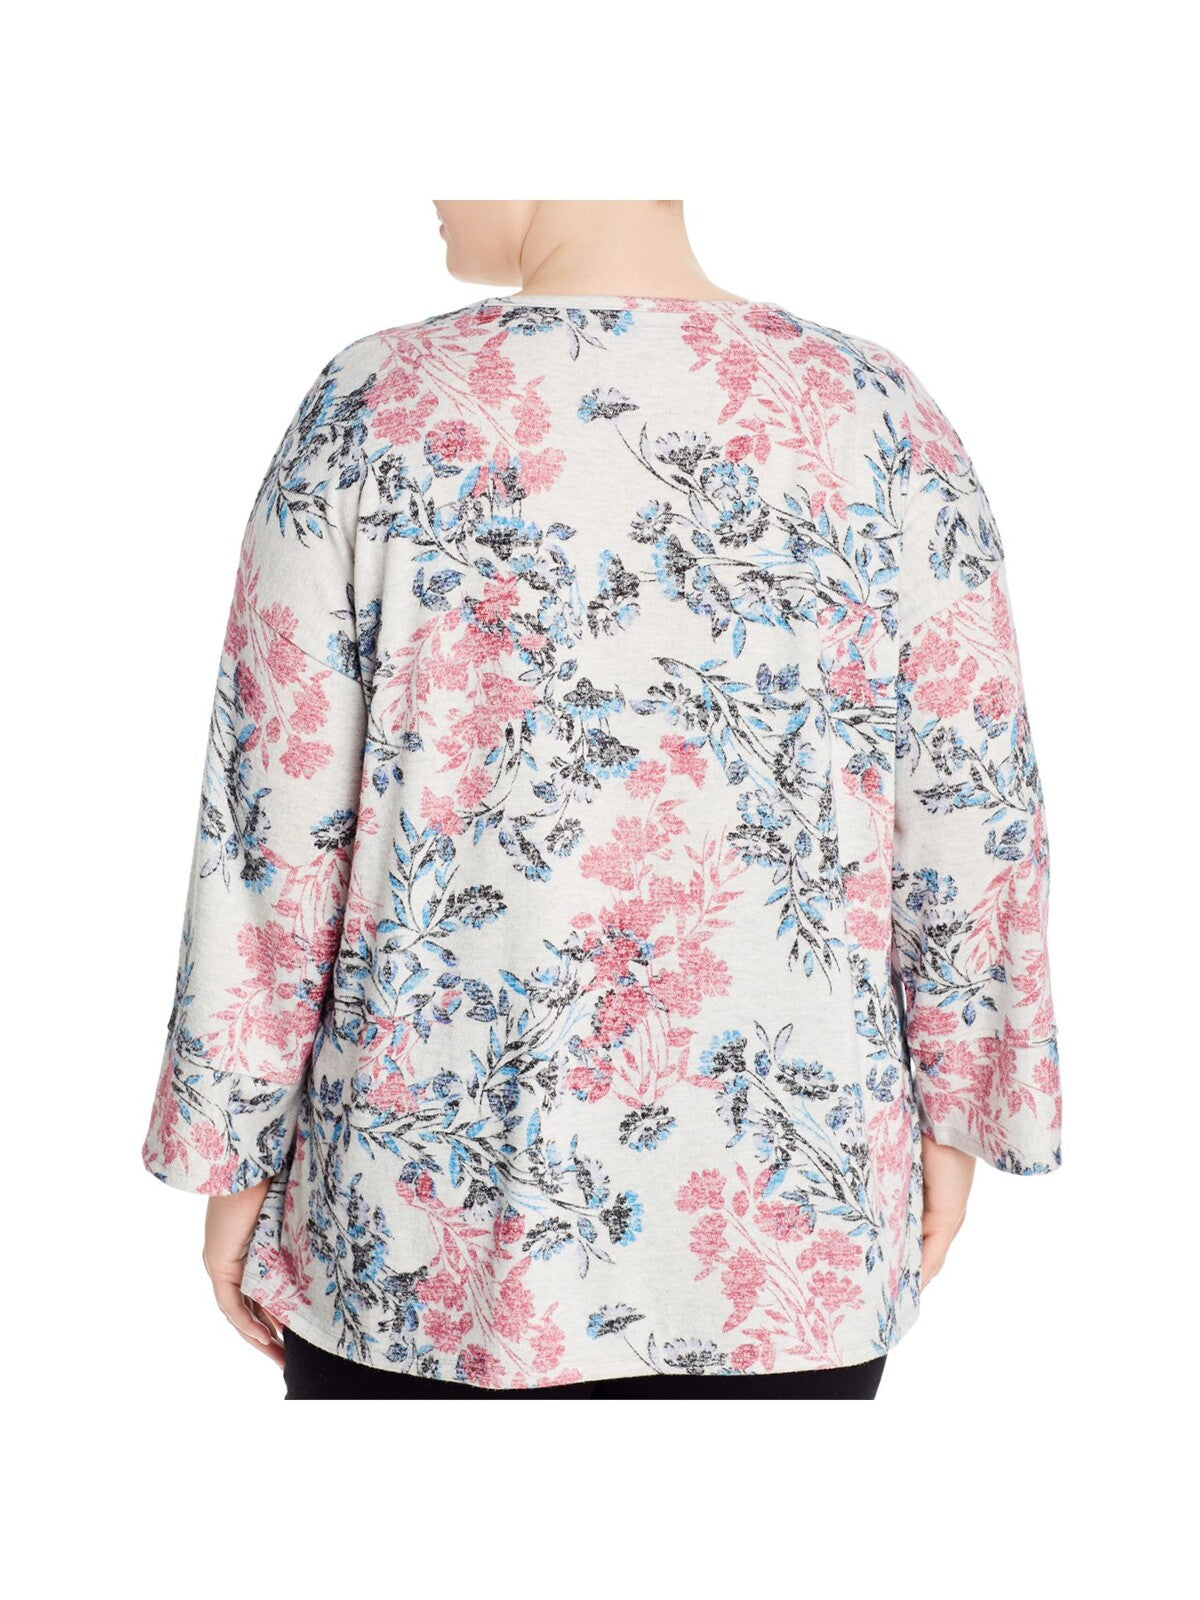 CUPIO BLUSH Womens Pink Floral Long Sleeve V Neck Wear To Work Sweater Plus 2X